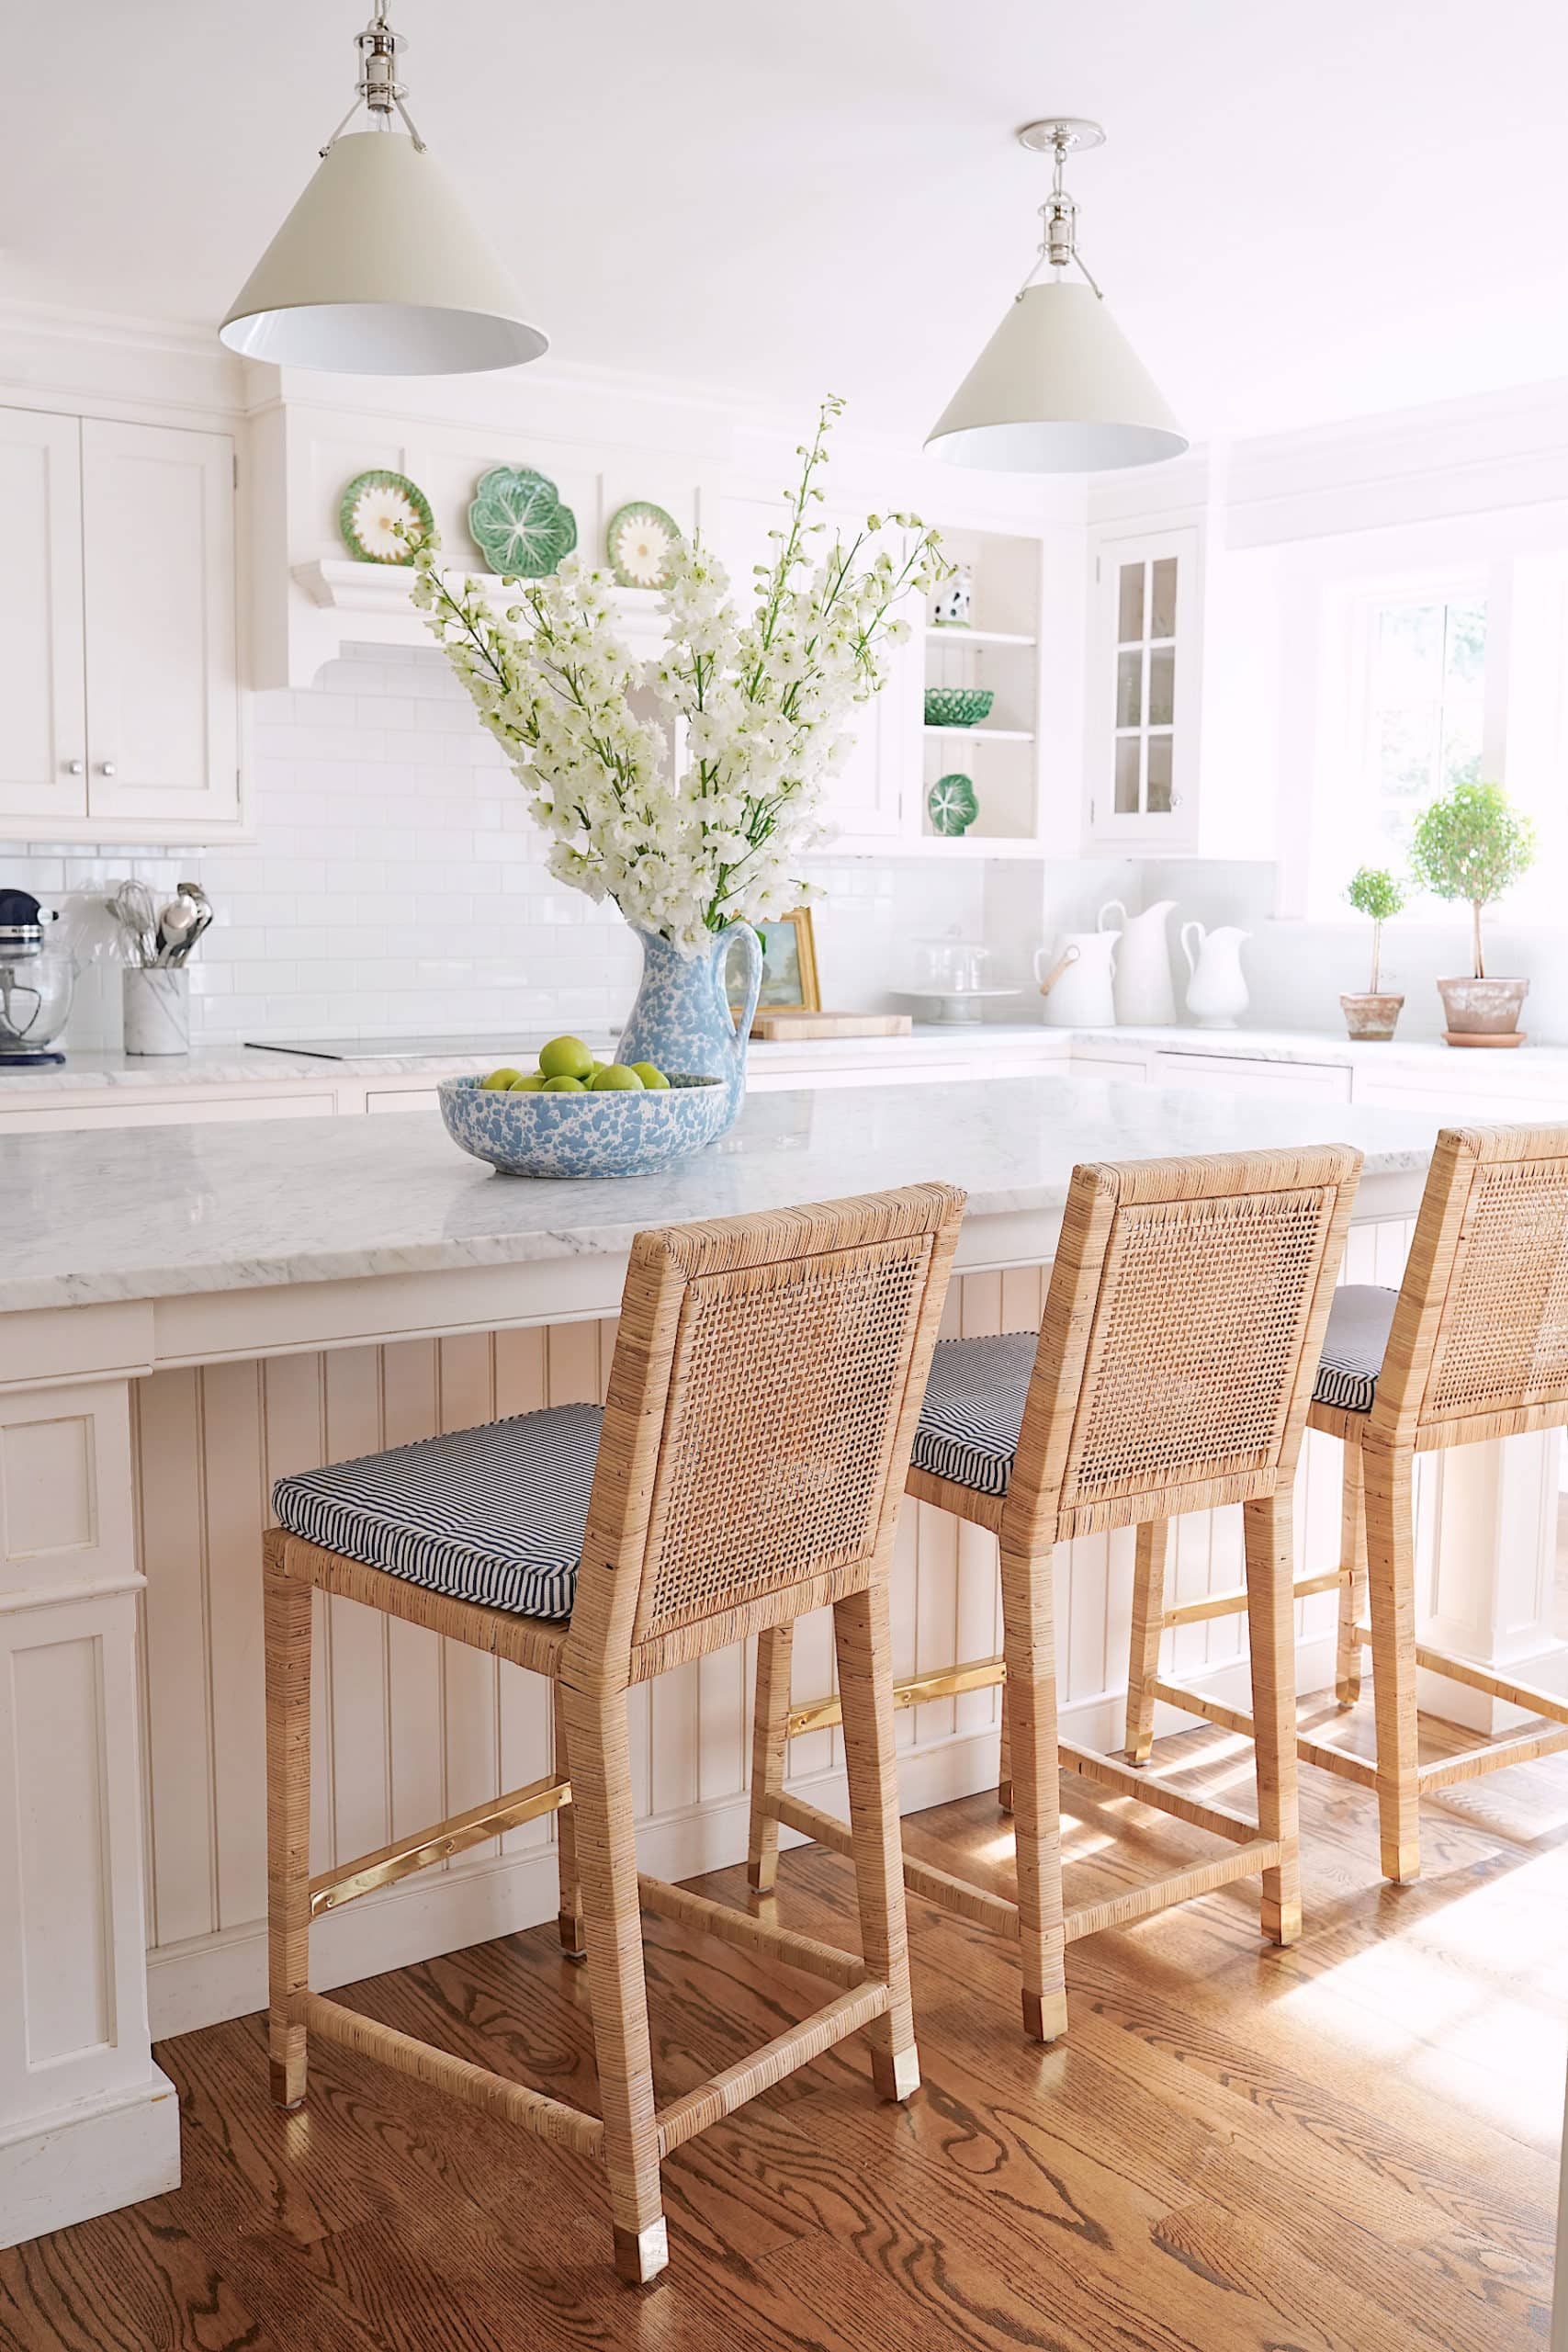 Light beige kitchen island with creamy white kitchen cabinets. Serena & Lily barstools and honey oak wood floors